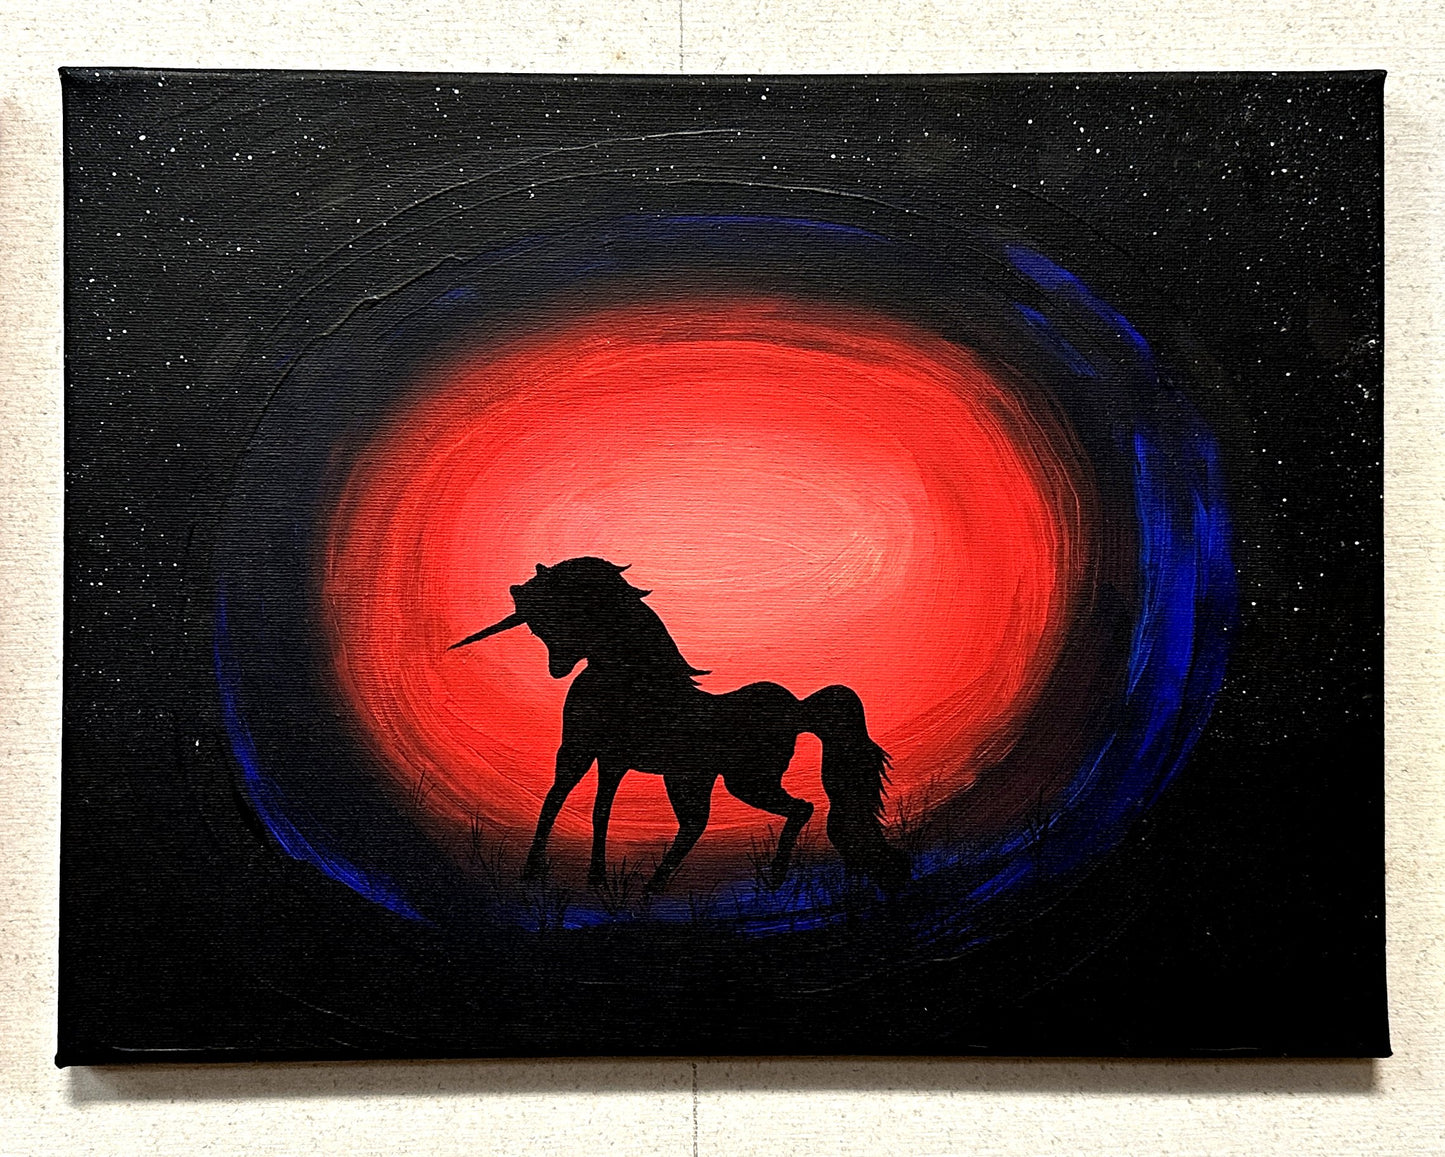 Blood Moon Unicorn Original Acrylic Painting by Andrew Read in North Devon